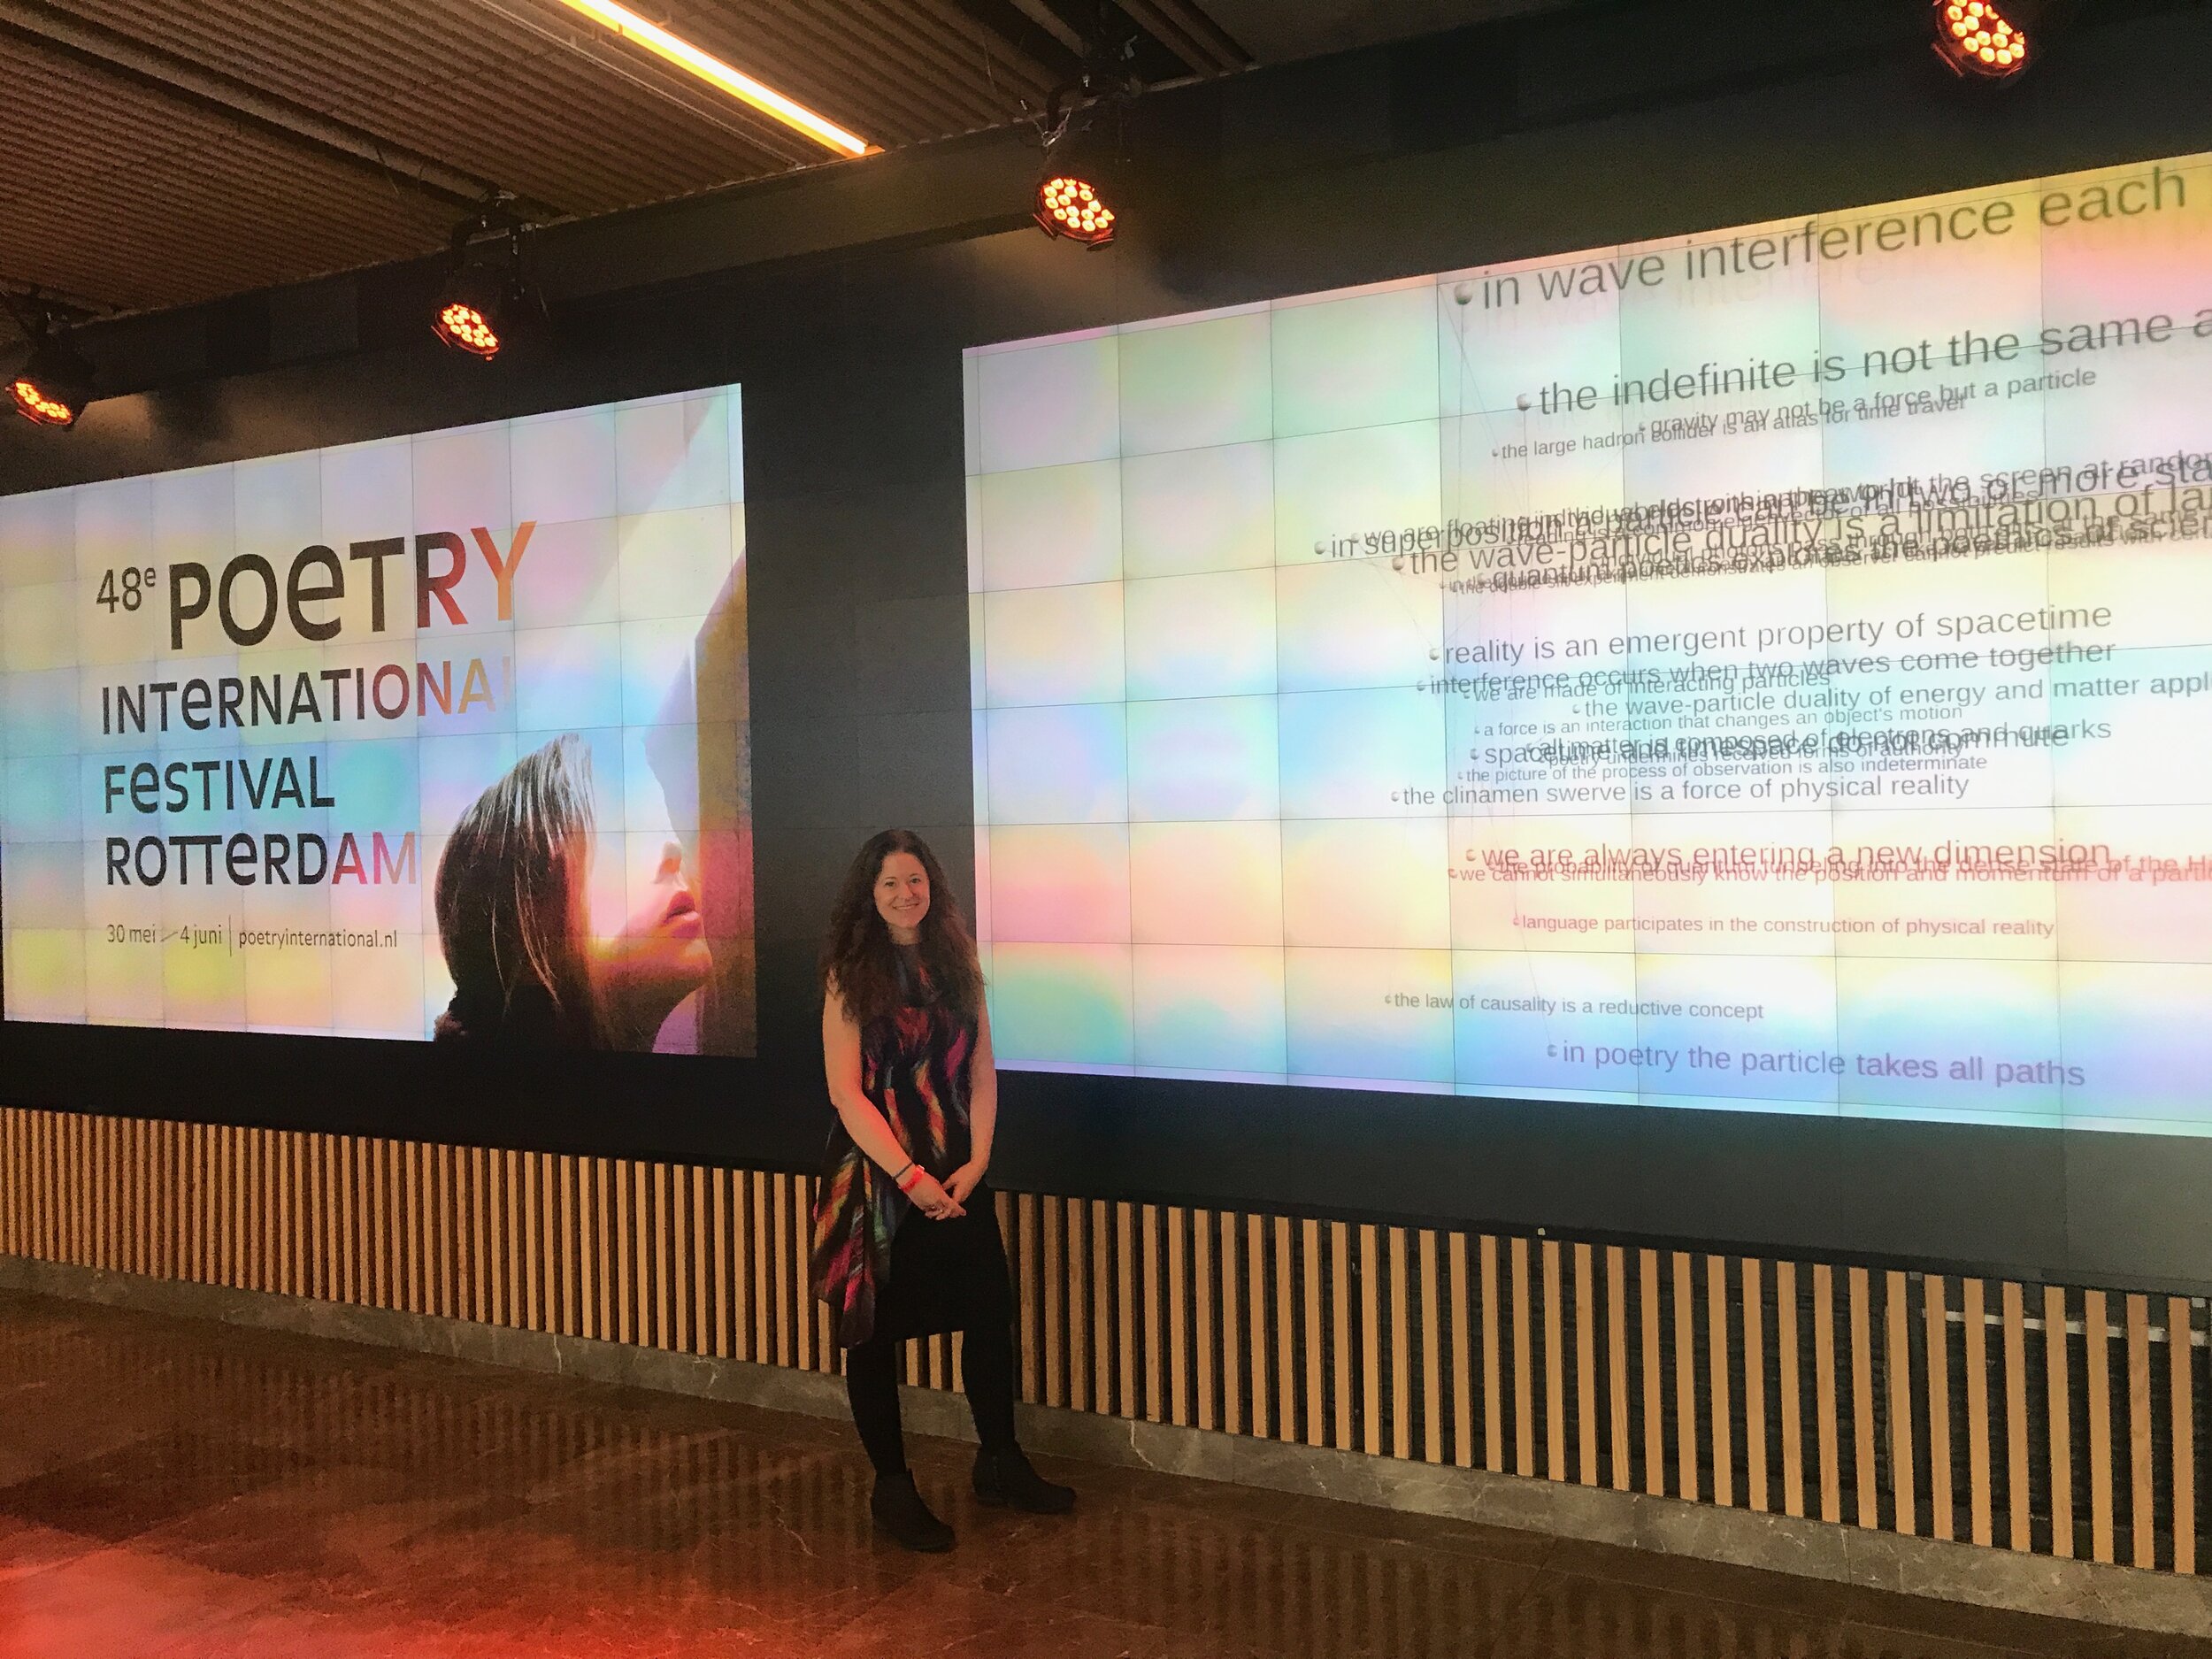 Amy Catanzano, 3D Poetry Editor, The Gravity of Words, Rotterdam Poetry Festival 2017